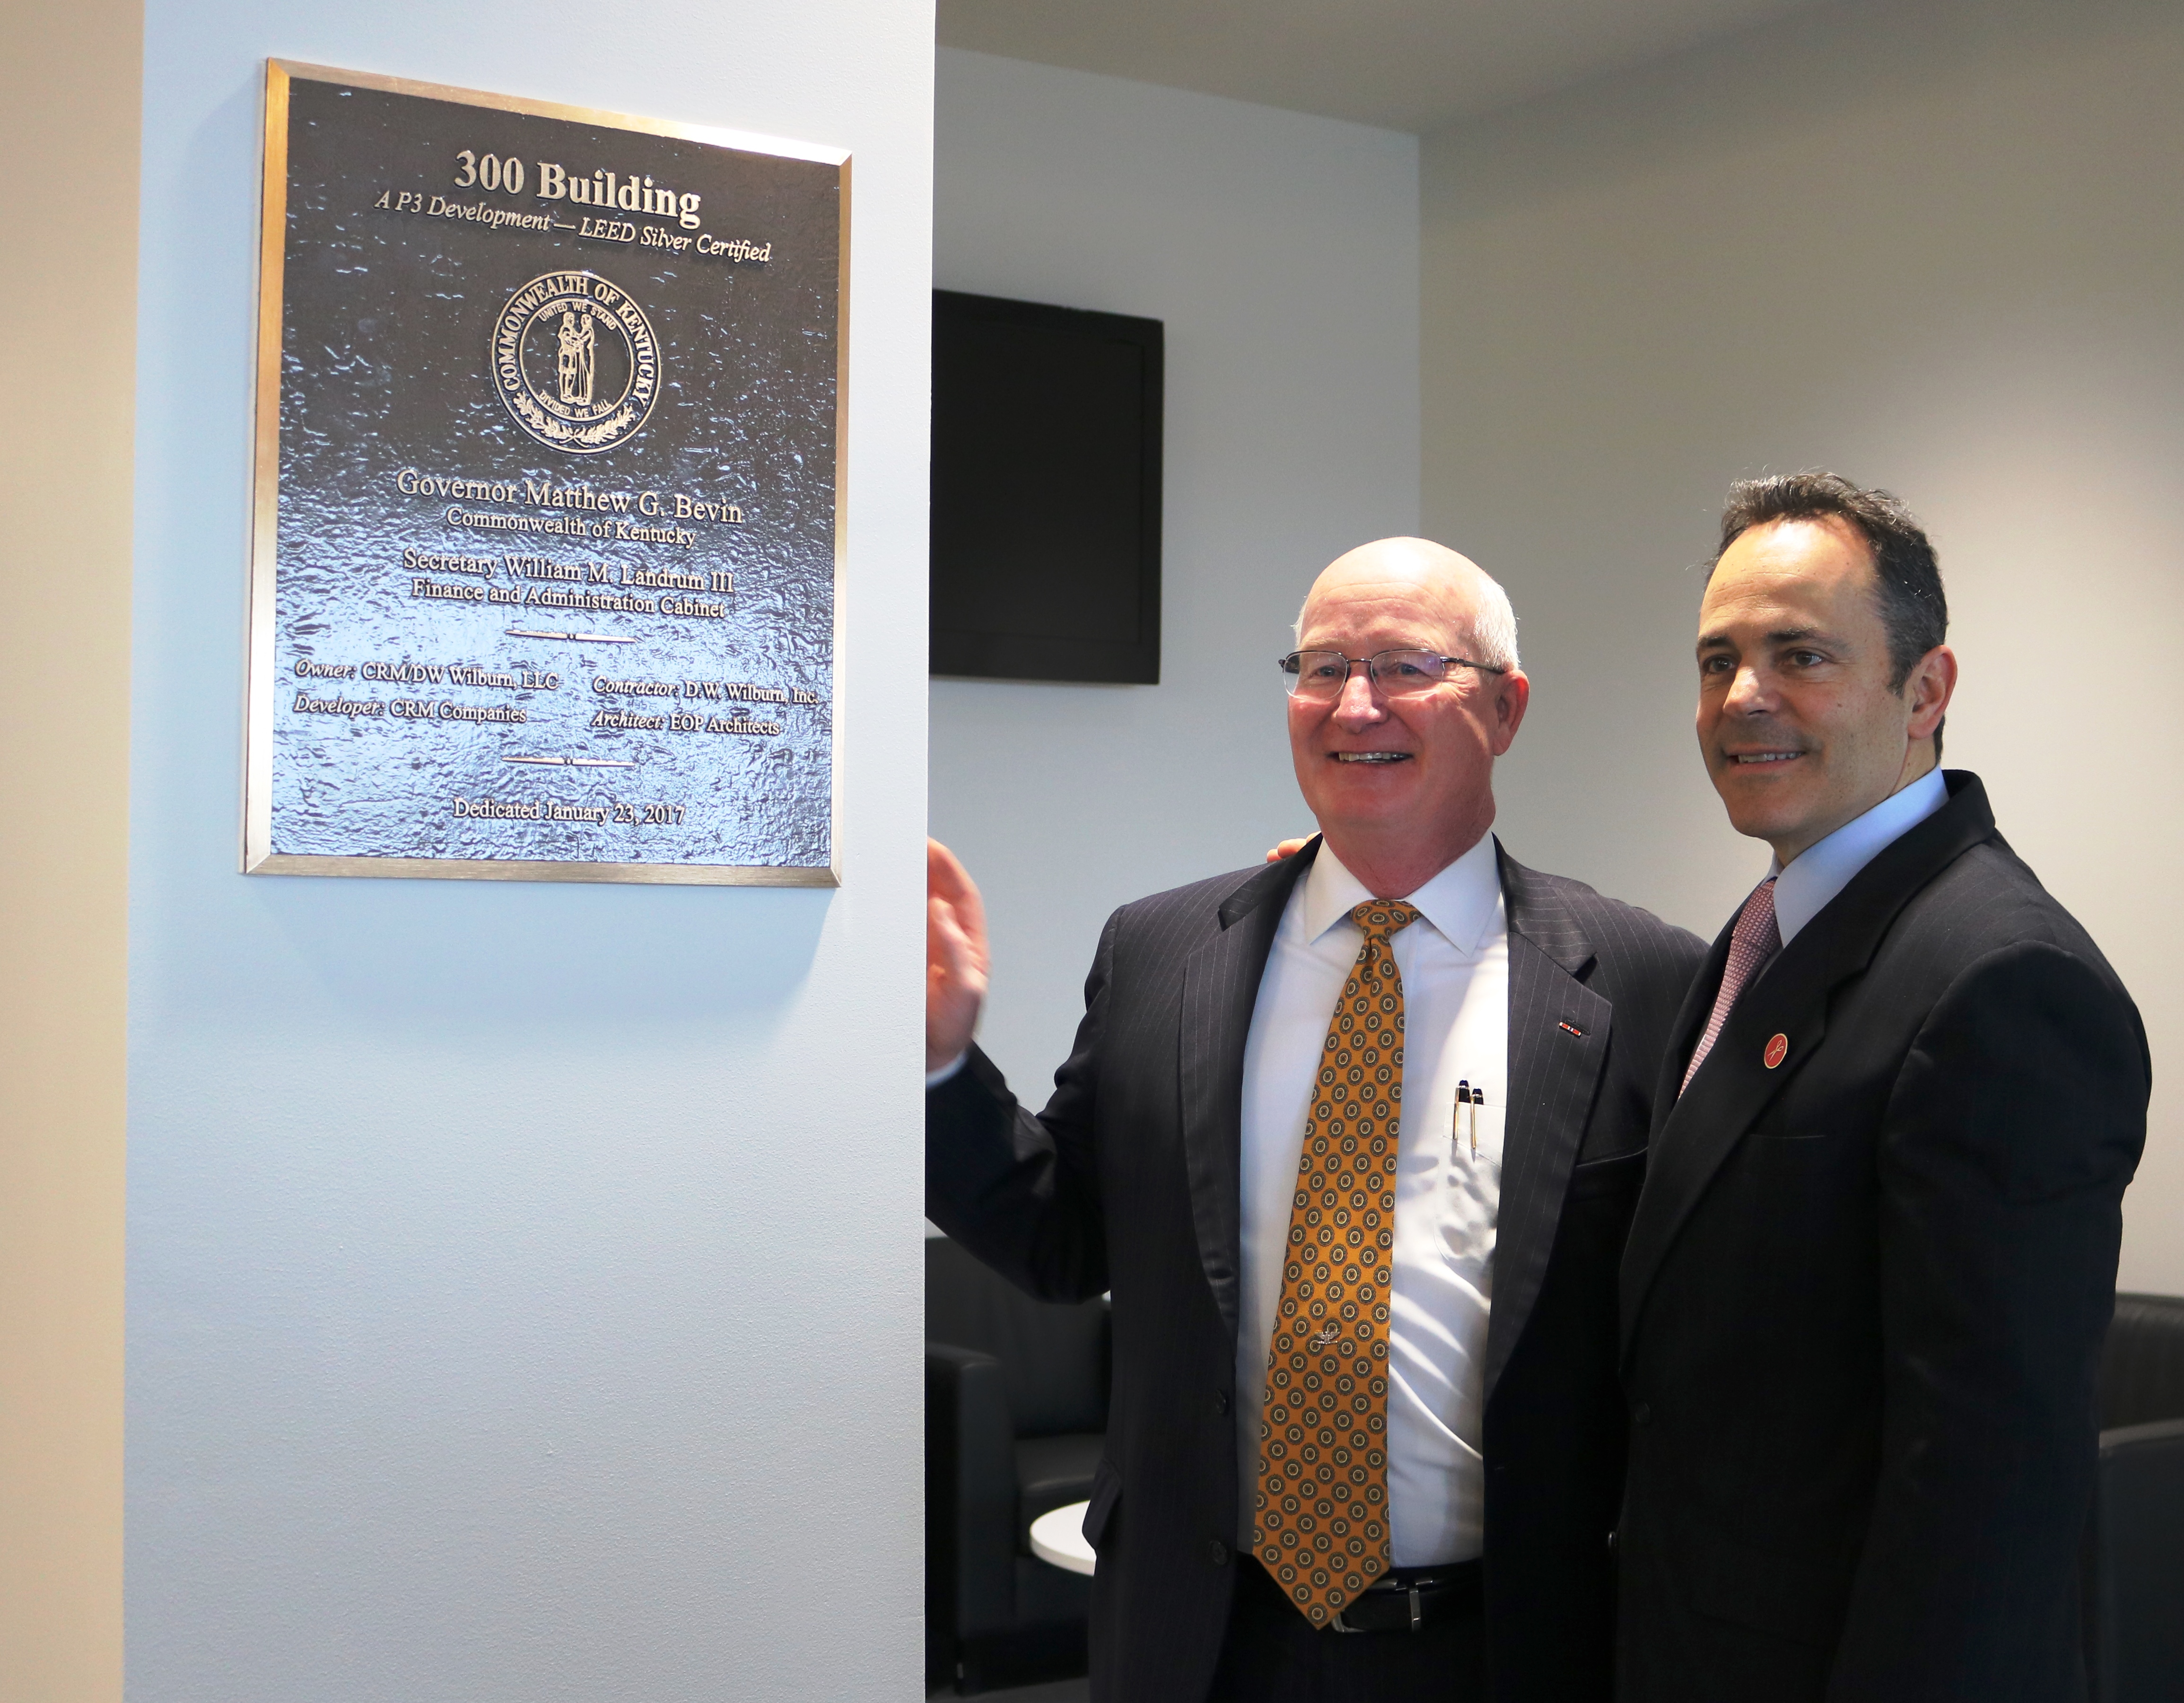 300 Building Dedicated By Gov Bevin Officials Naturally Connected